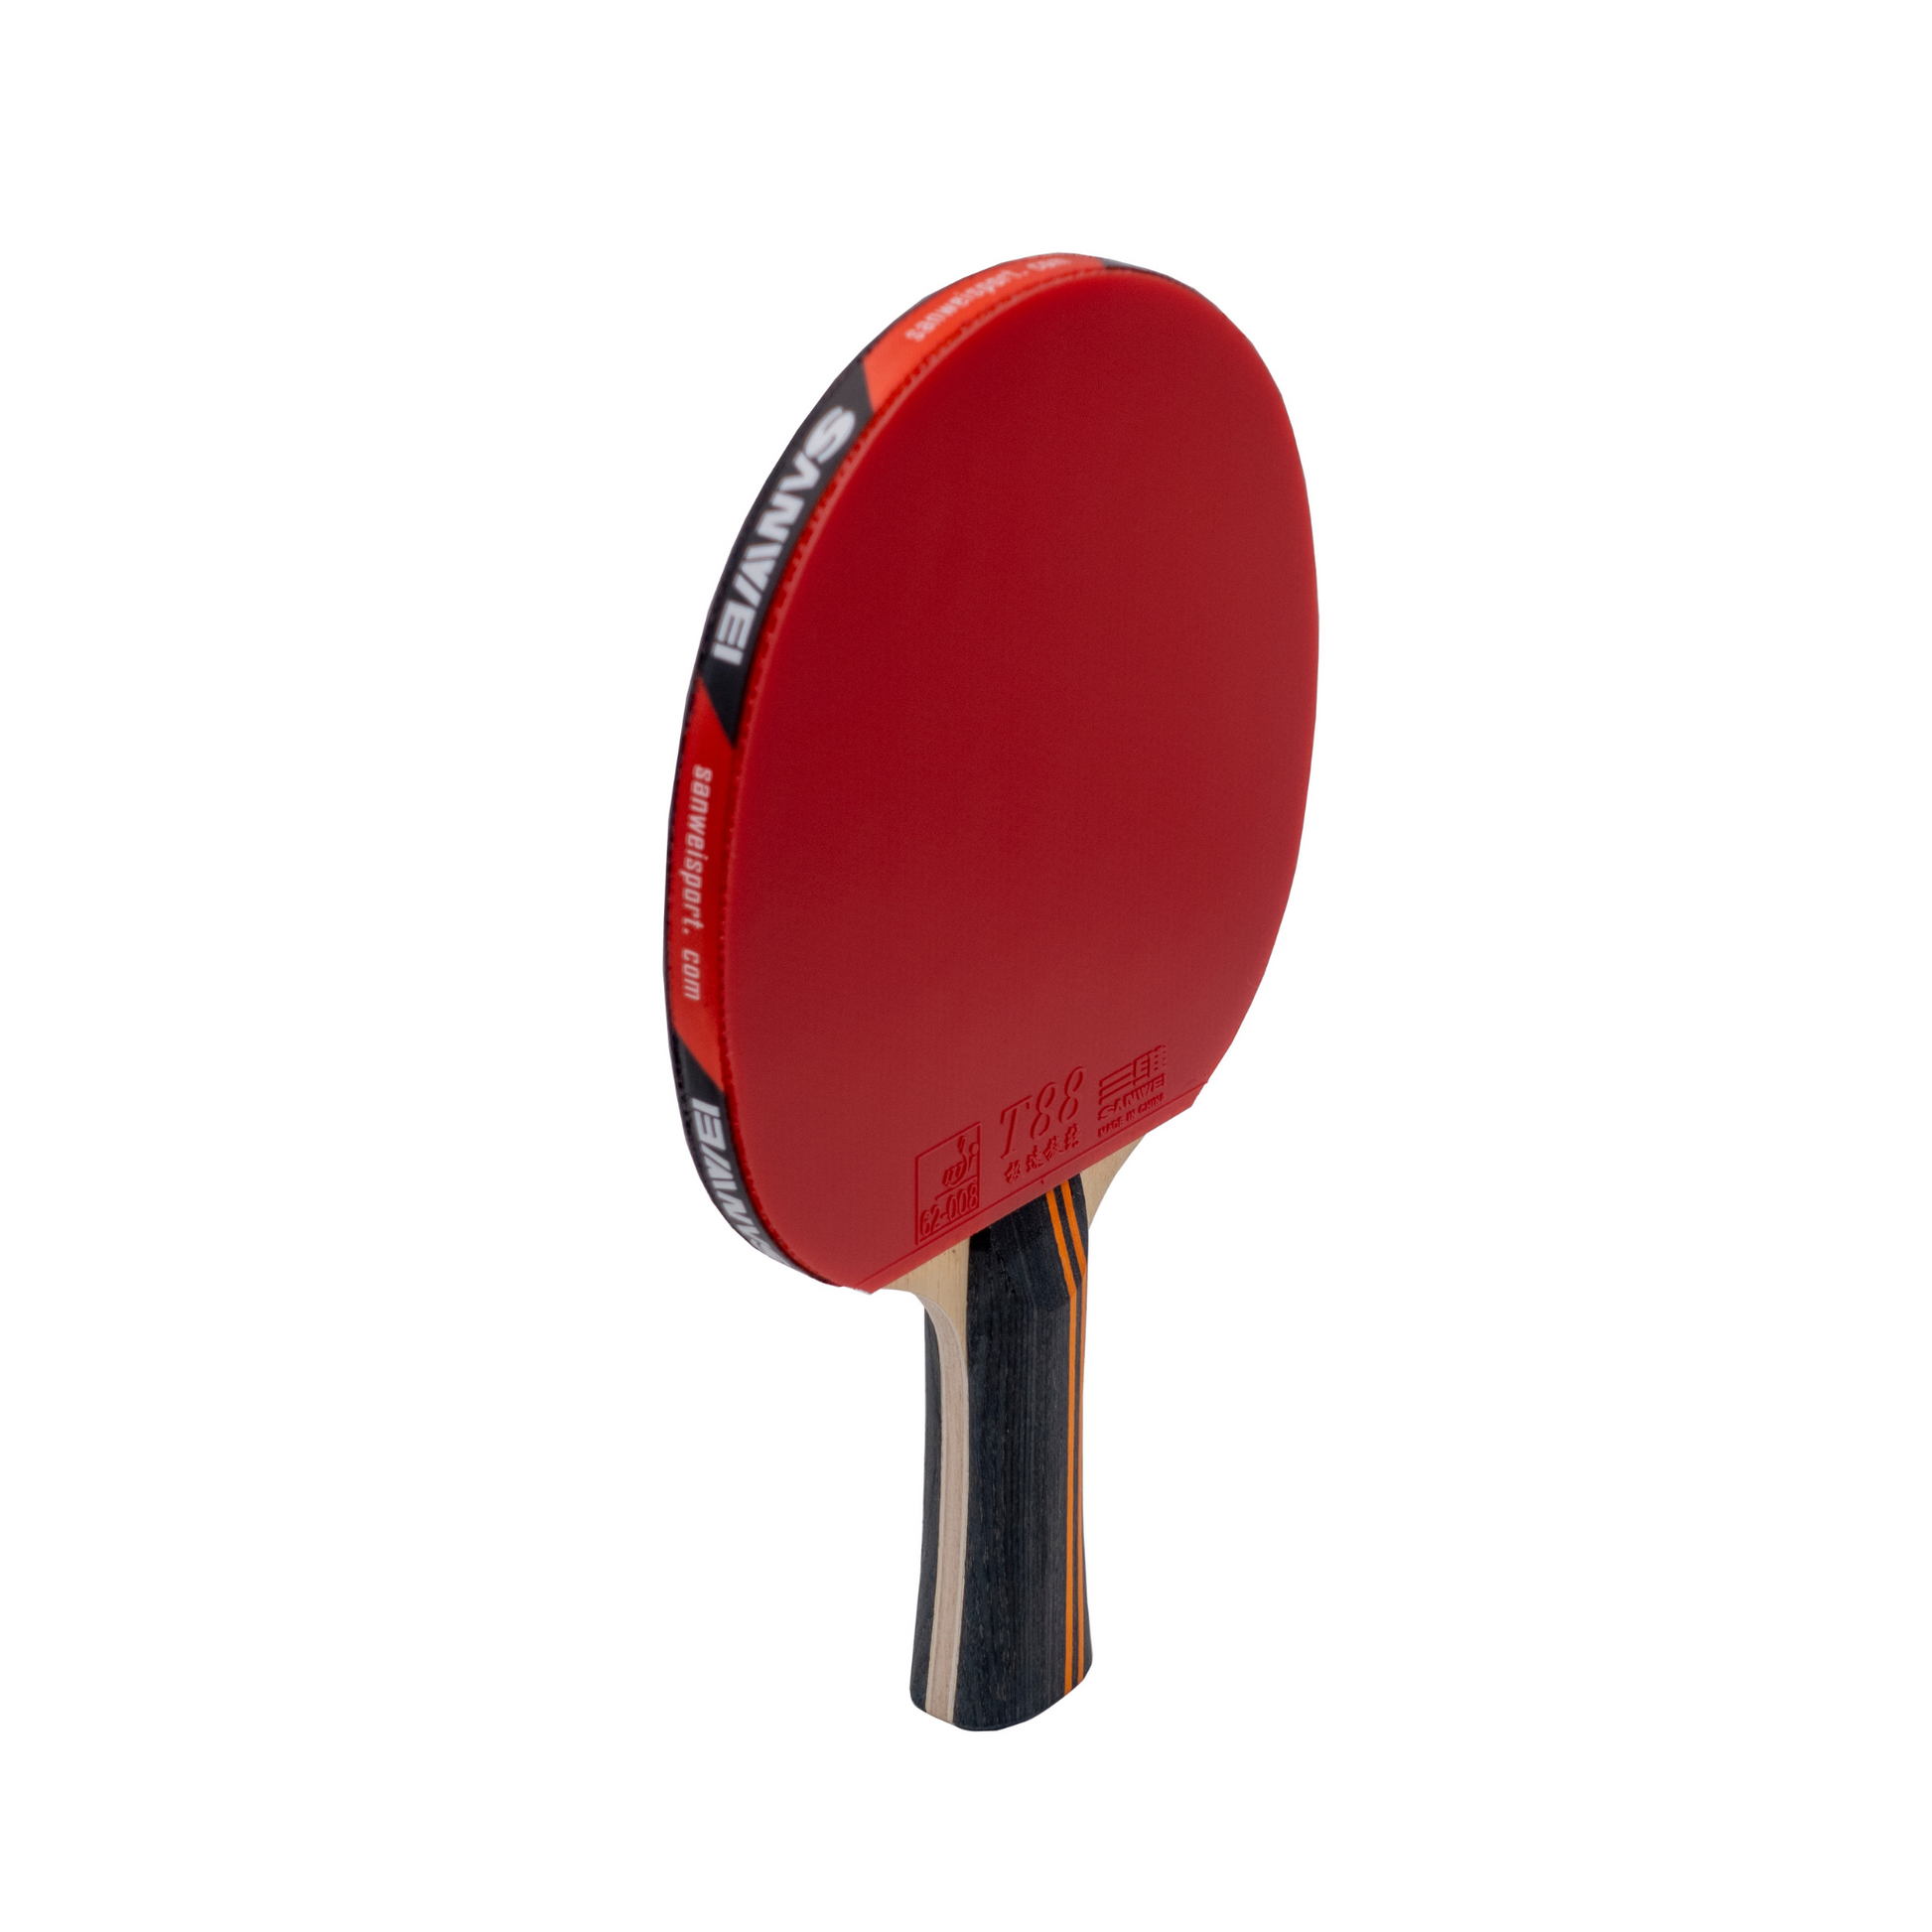 Sanwei Accumulator S88 table tennis bat with 5-ply wood blade and Ultra Spin T88 rubbers, ideal for advanced beginners.